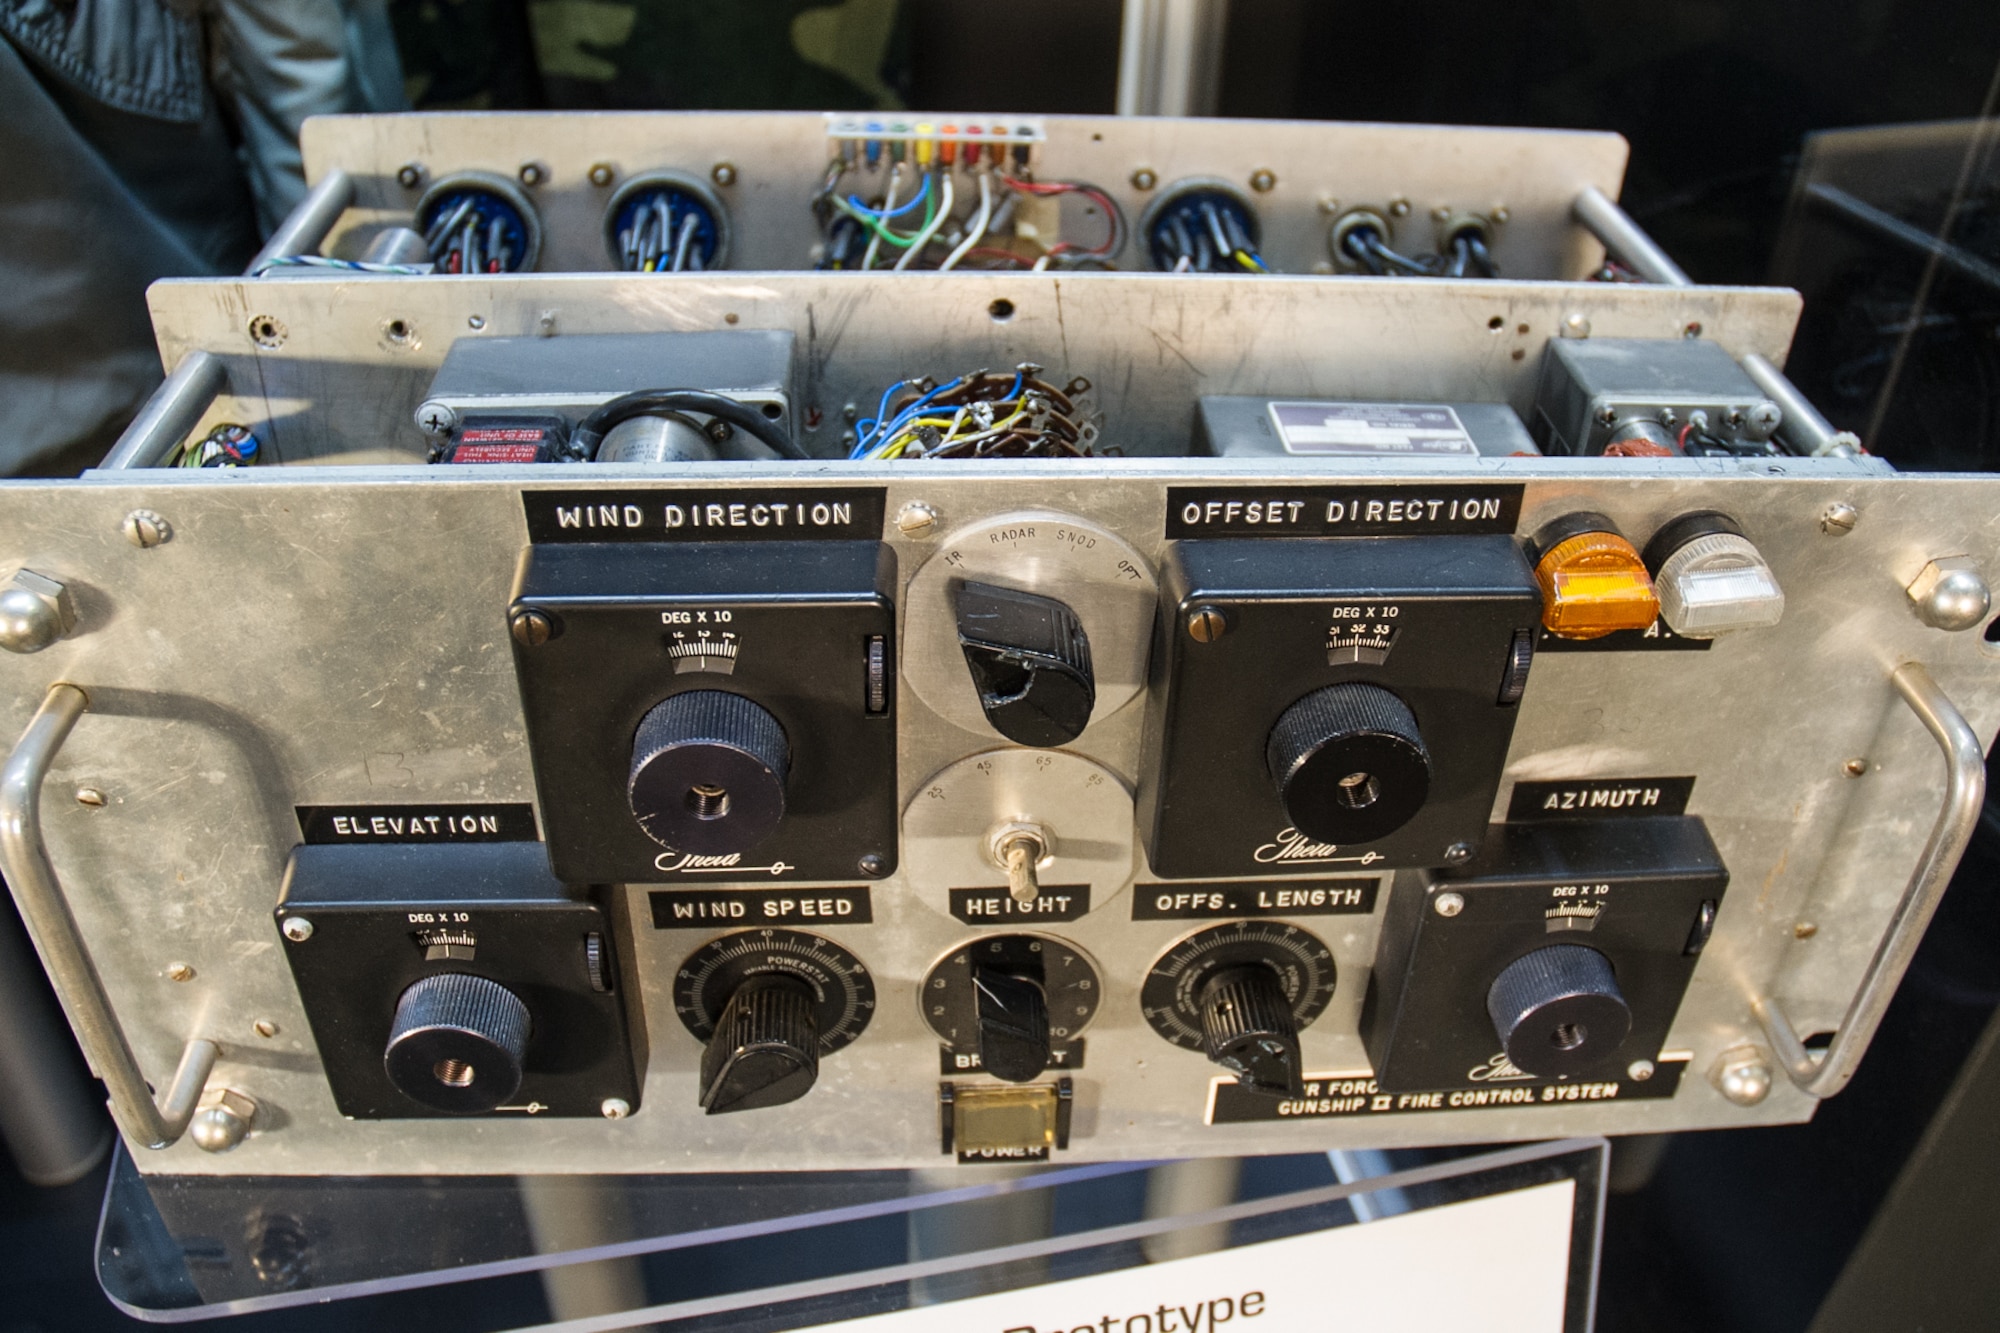 DAYTON, Ohio -- AC-130A Prototype Fire Control Computer on display in the Southeast Asia War Gallery at the National Museum of the U.S. Air Force. (U.S. Air Force photo)